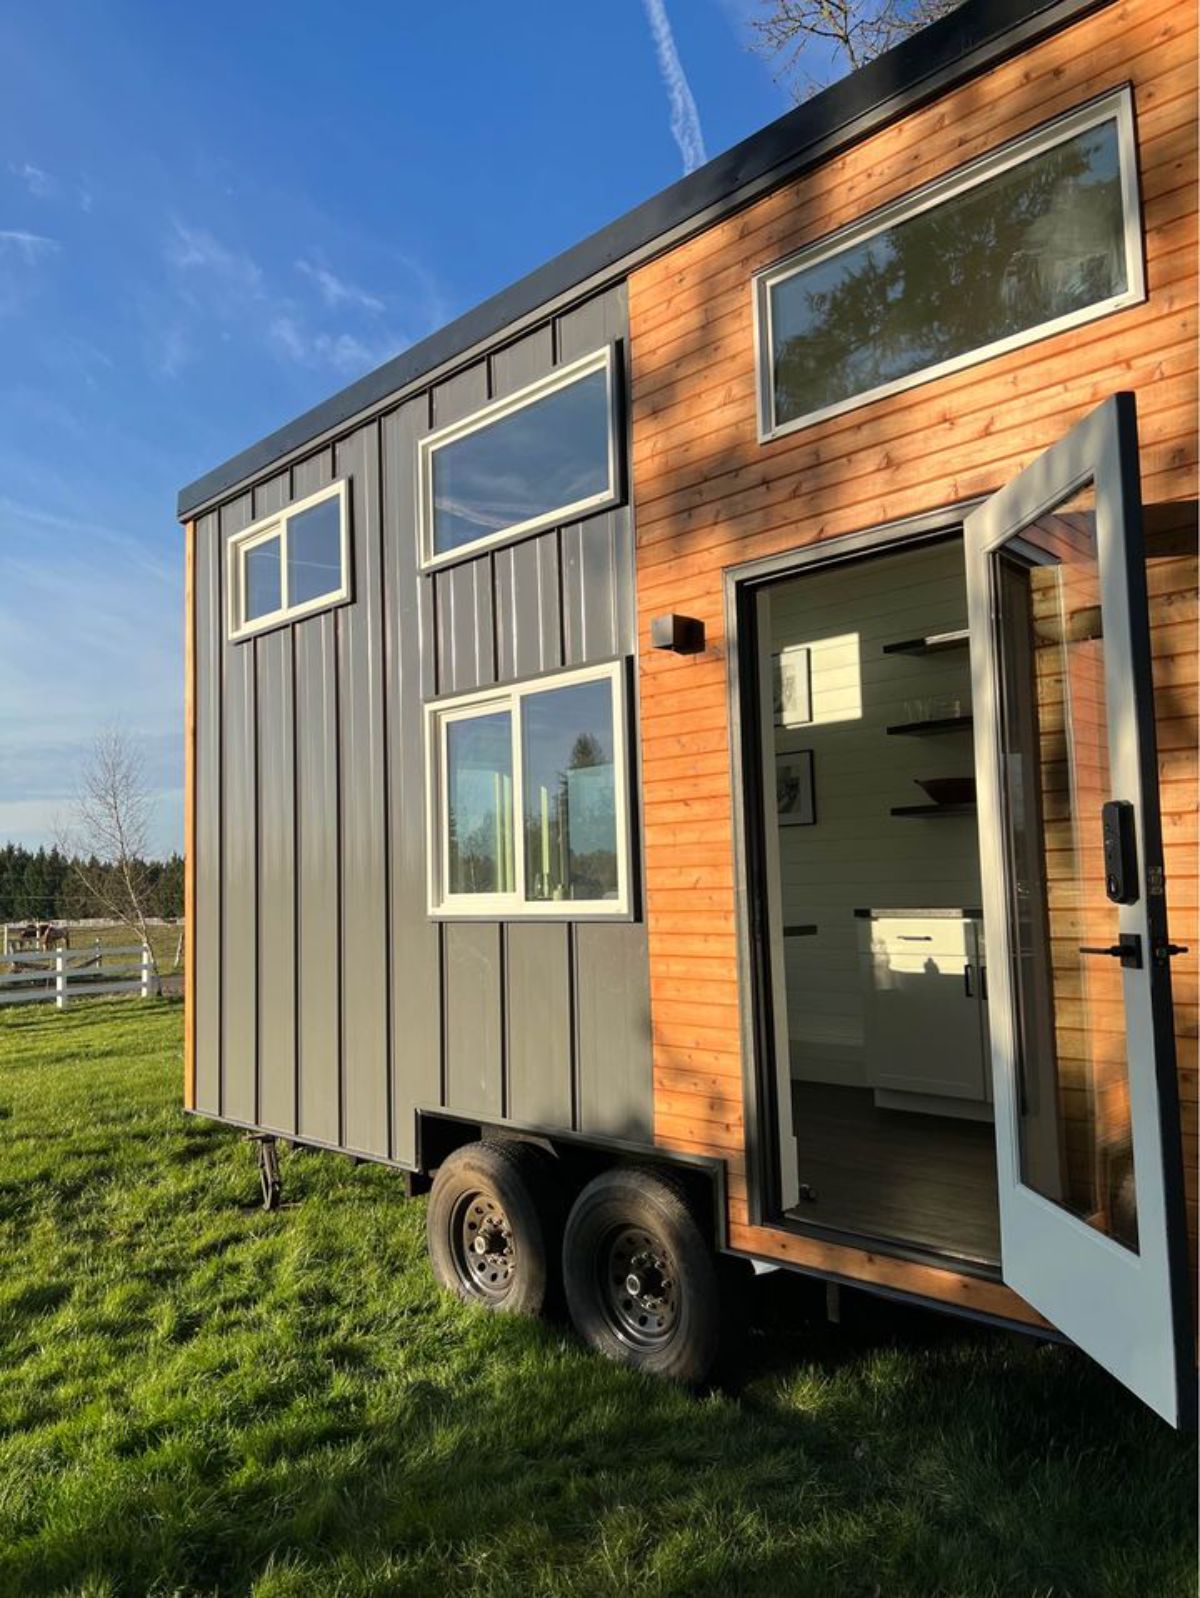 Wooden Exterior of Modern Tiny Home on Wheels